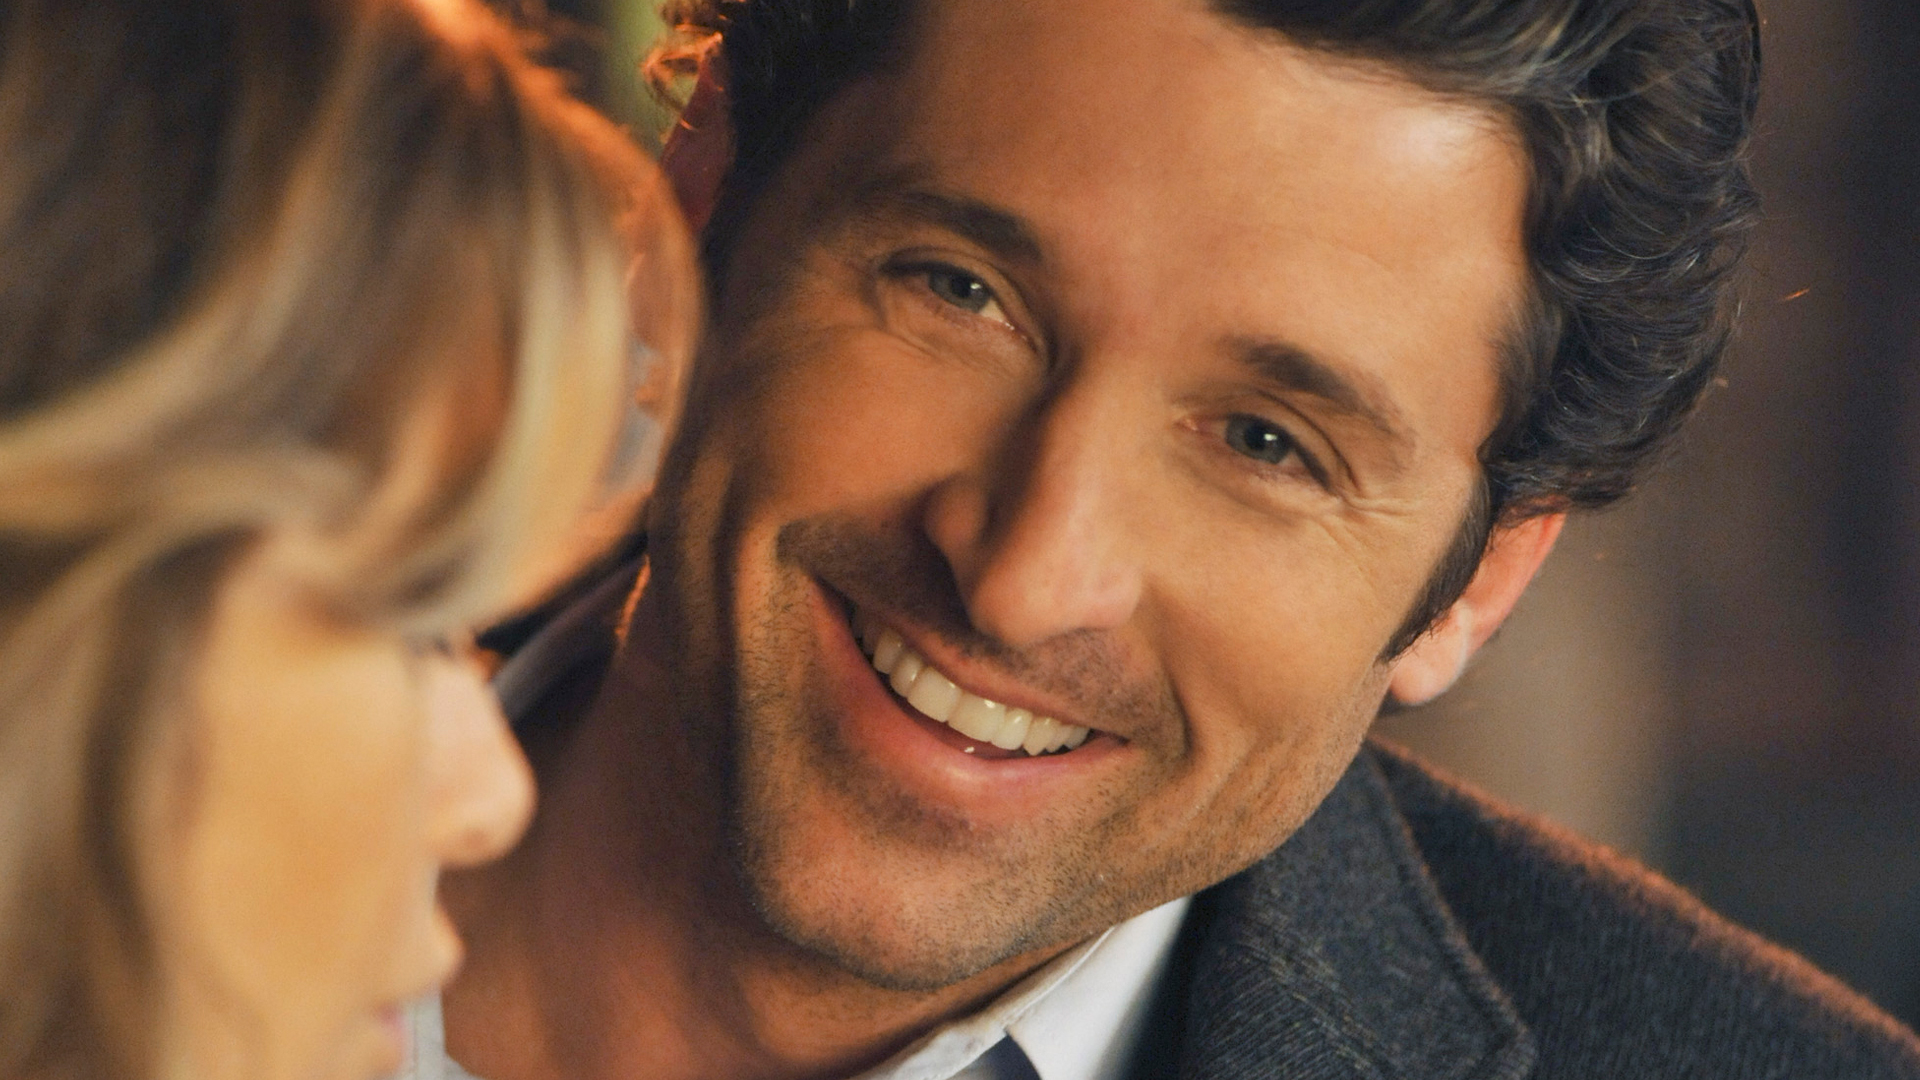 Patrick Dempsey as Derek ‘McDreamy’ Shepherd smiling at Ellen Pompeo as Meredith Grey in ‘Grey’s Anatomy,’ ‘There’s No I in Team’